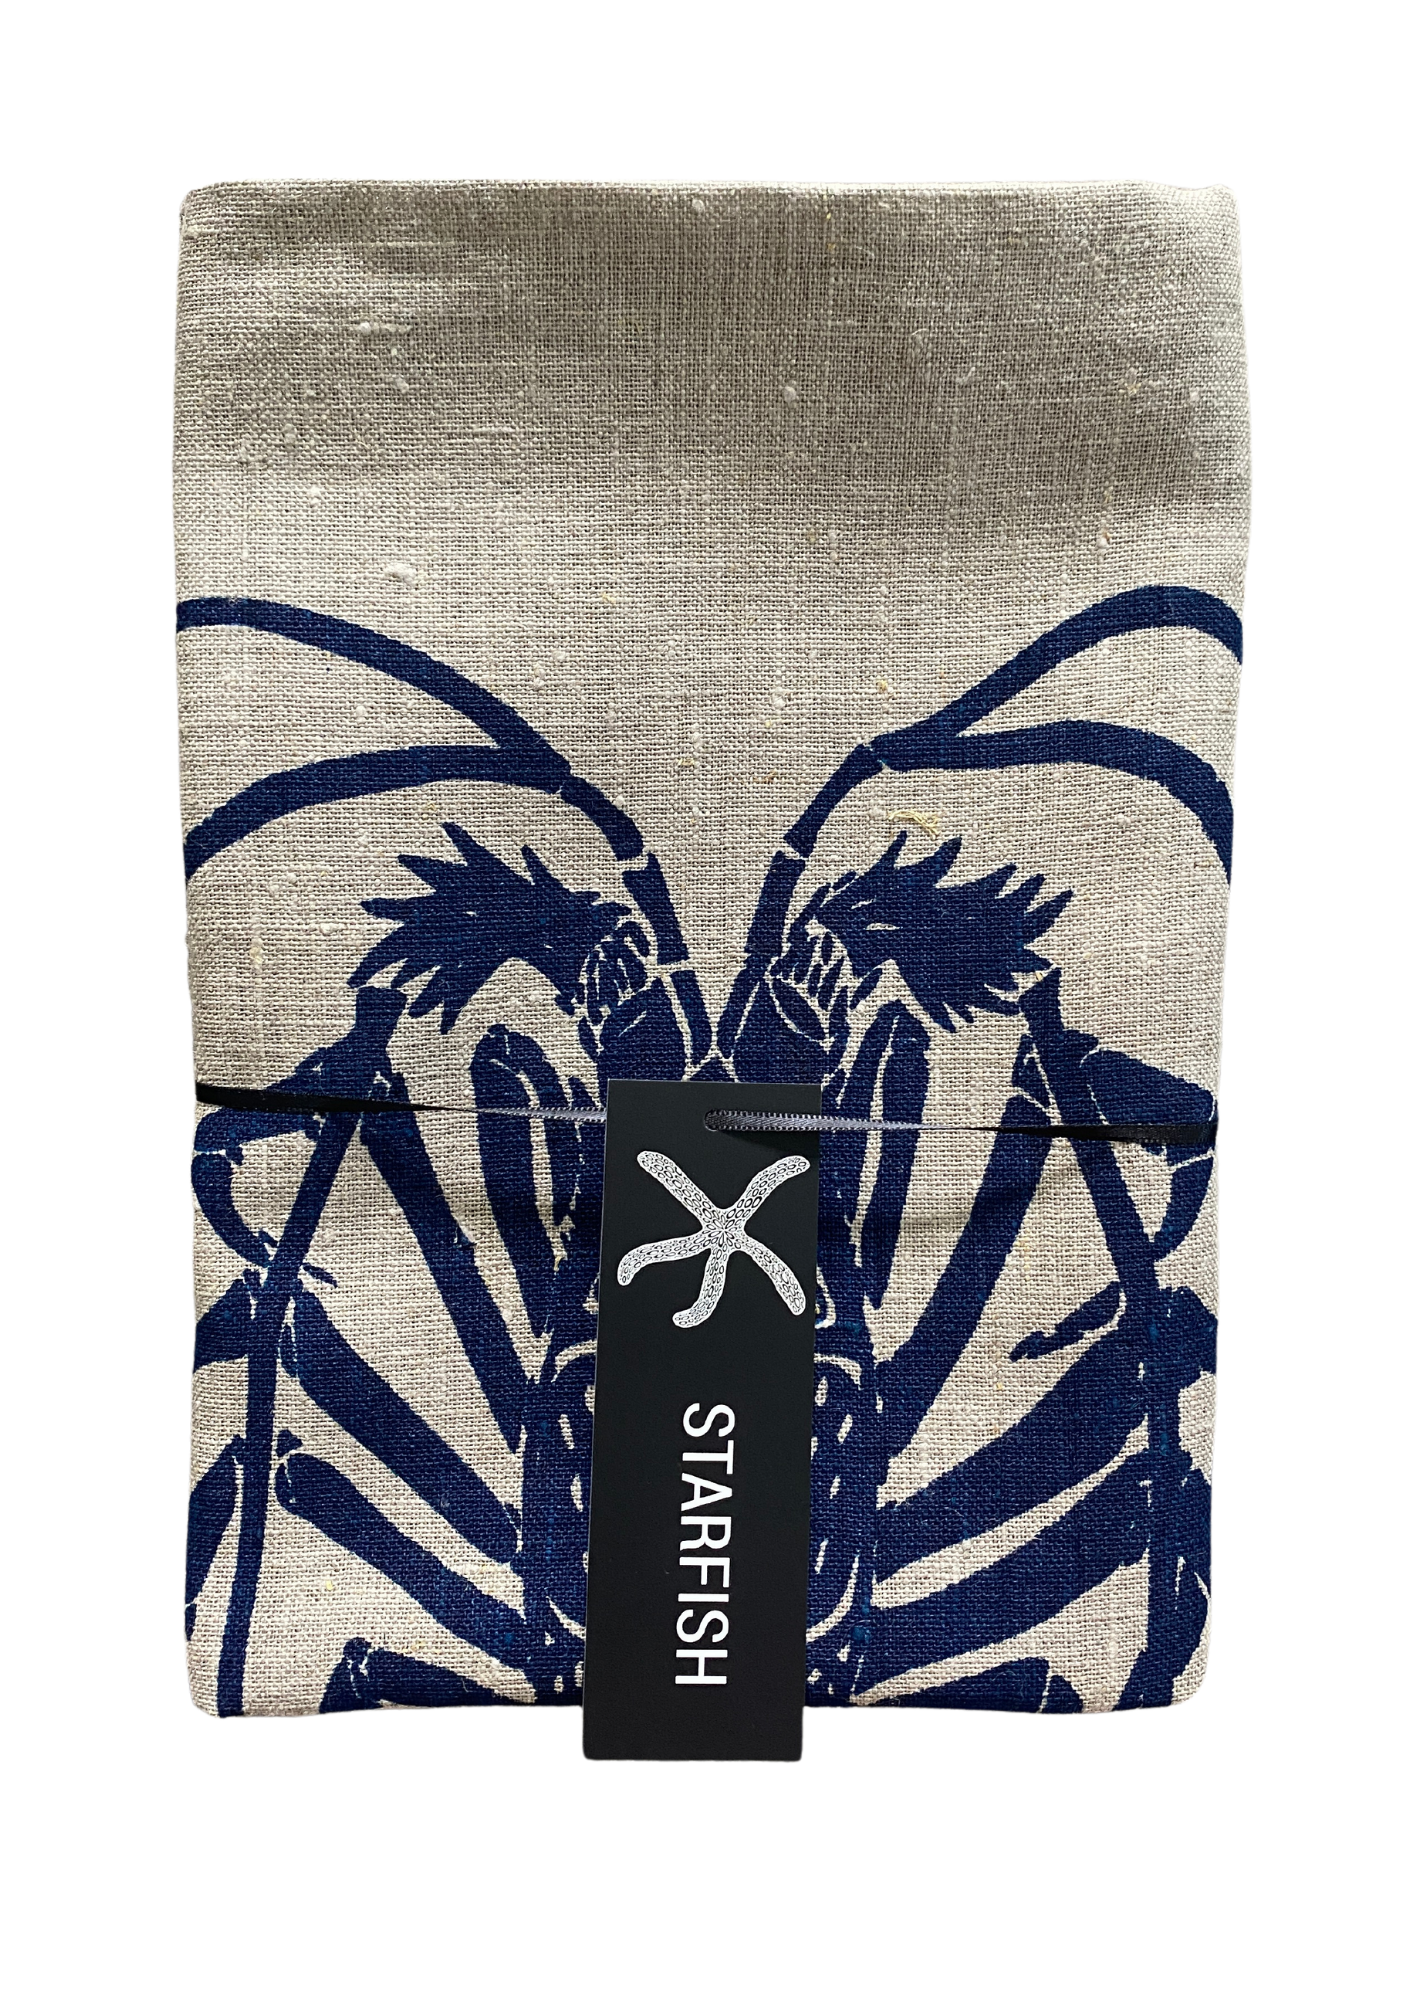 CRAYFISH, navy on Flax SCATTER CUSHION LINEN